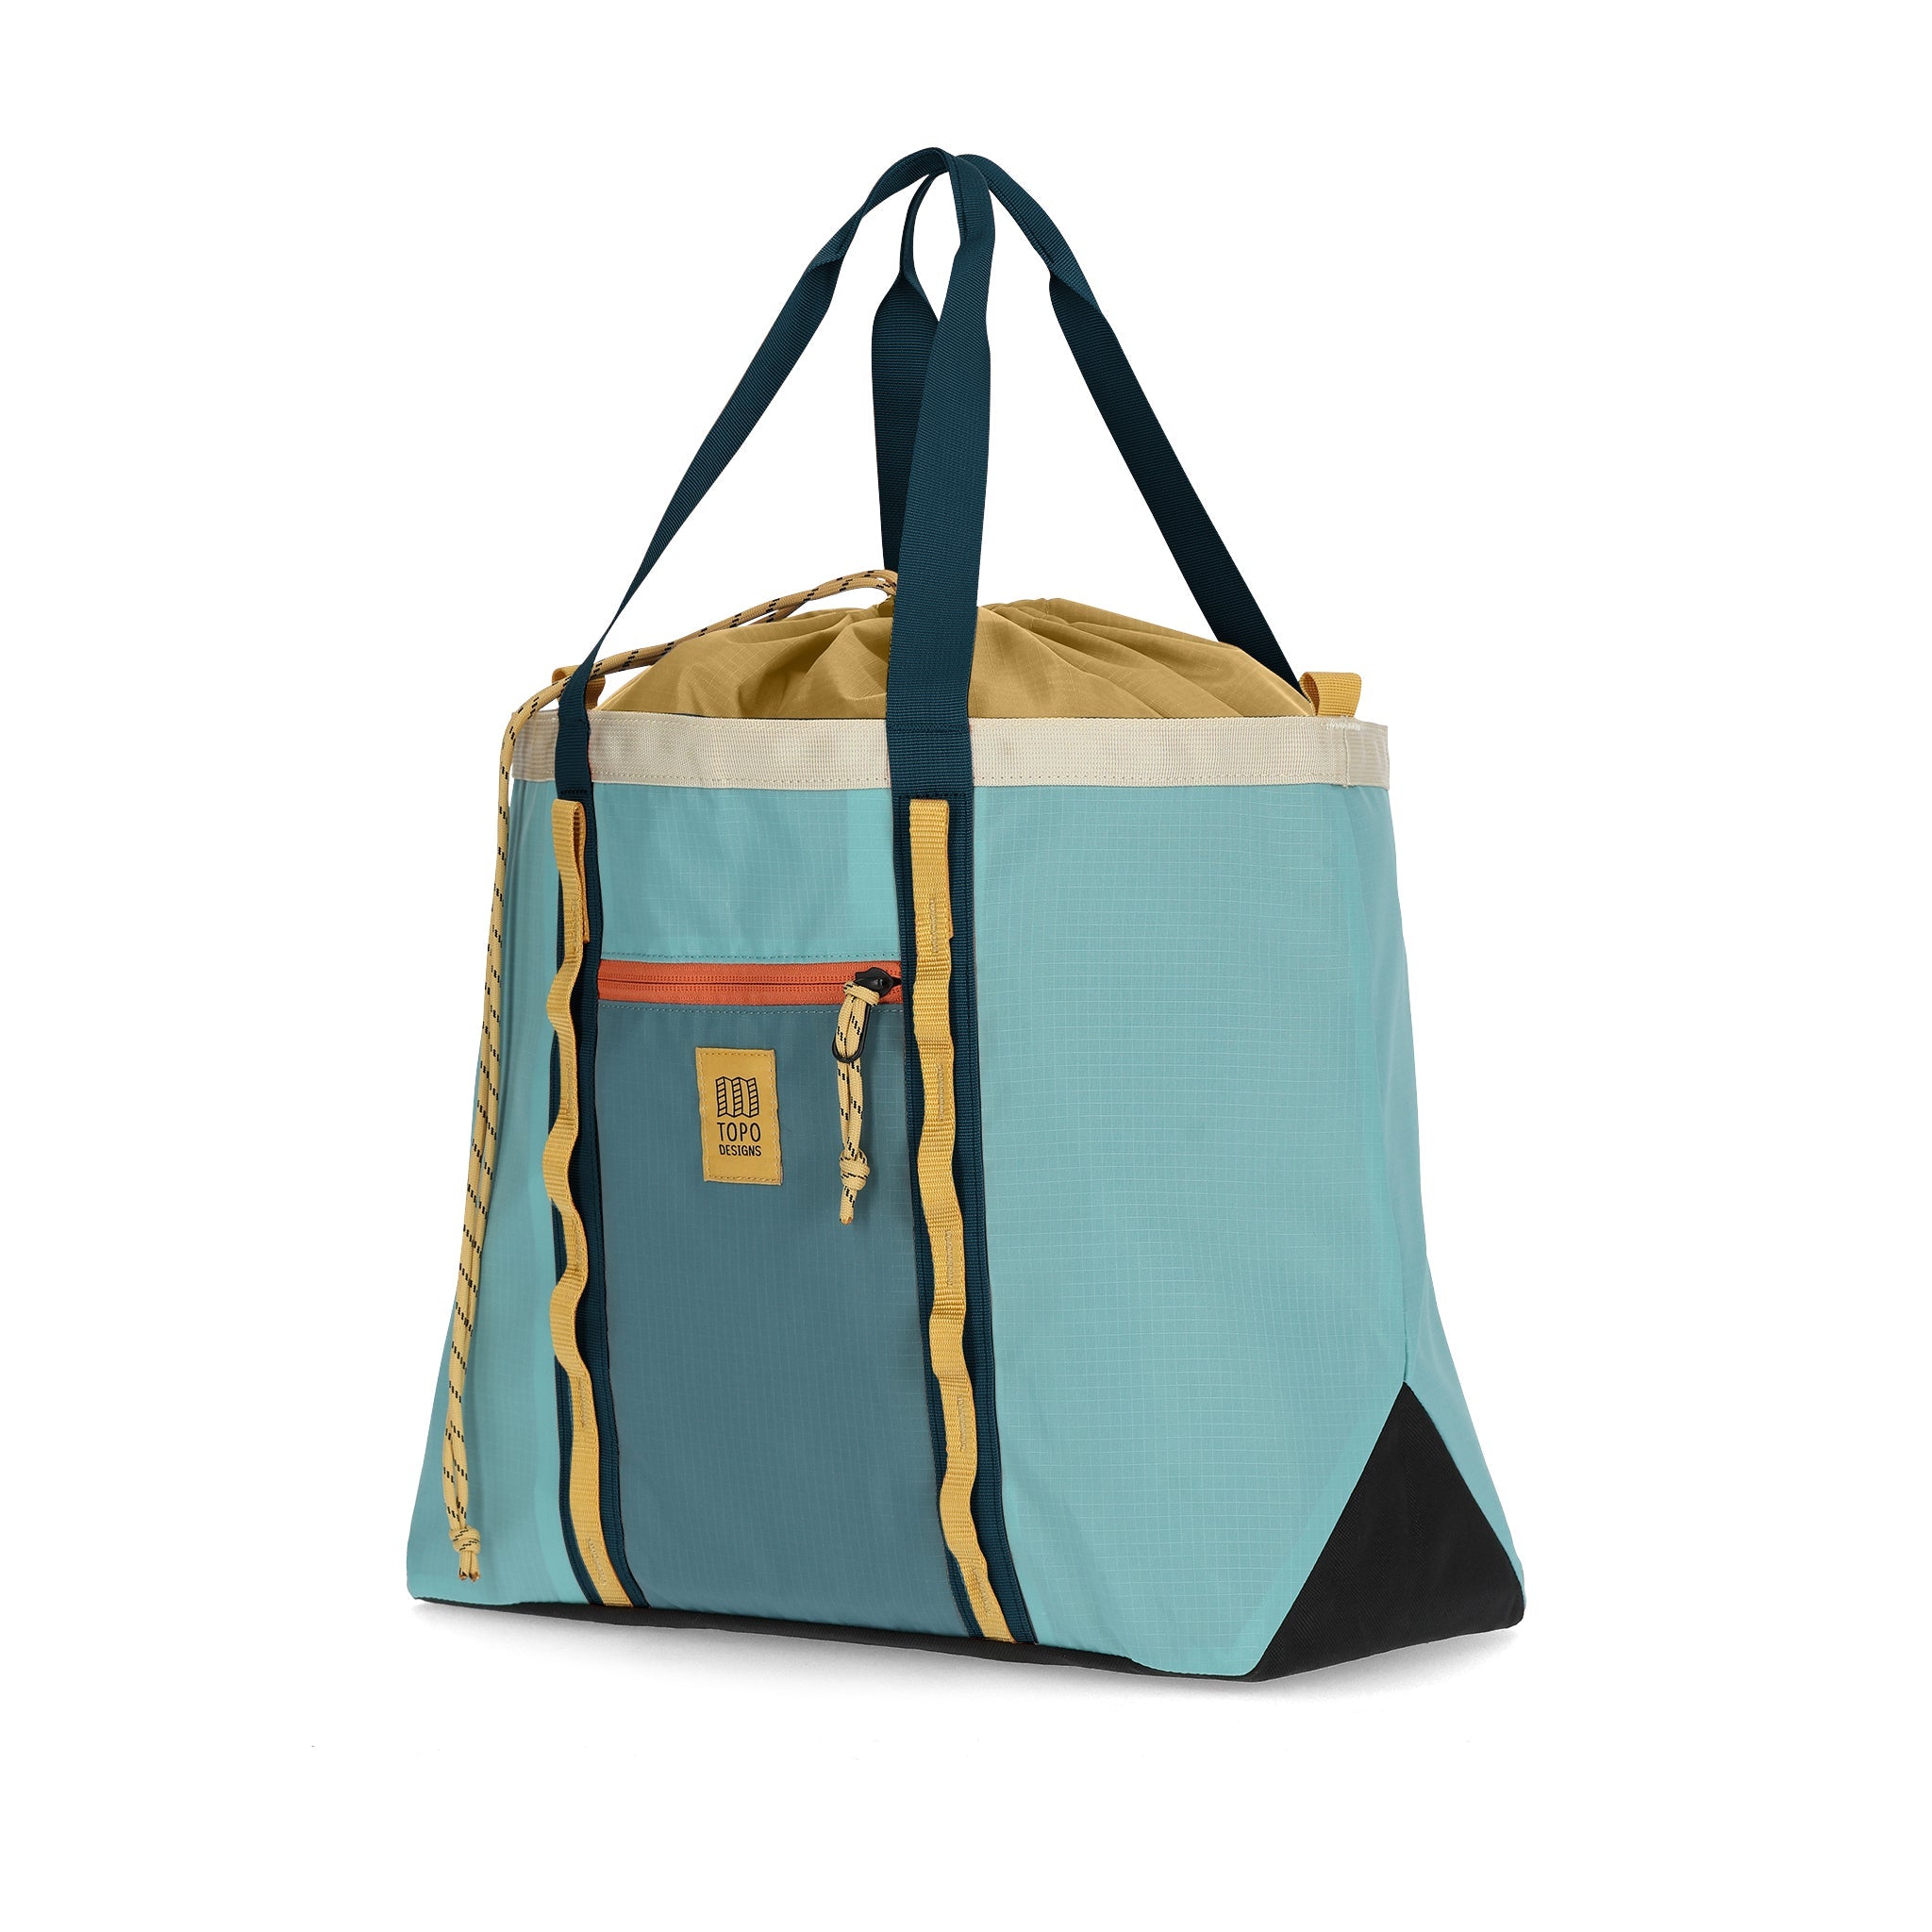 Front View of Topo Designs Mountain Utility Tote in "Geode Green / Sea Pine"